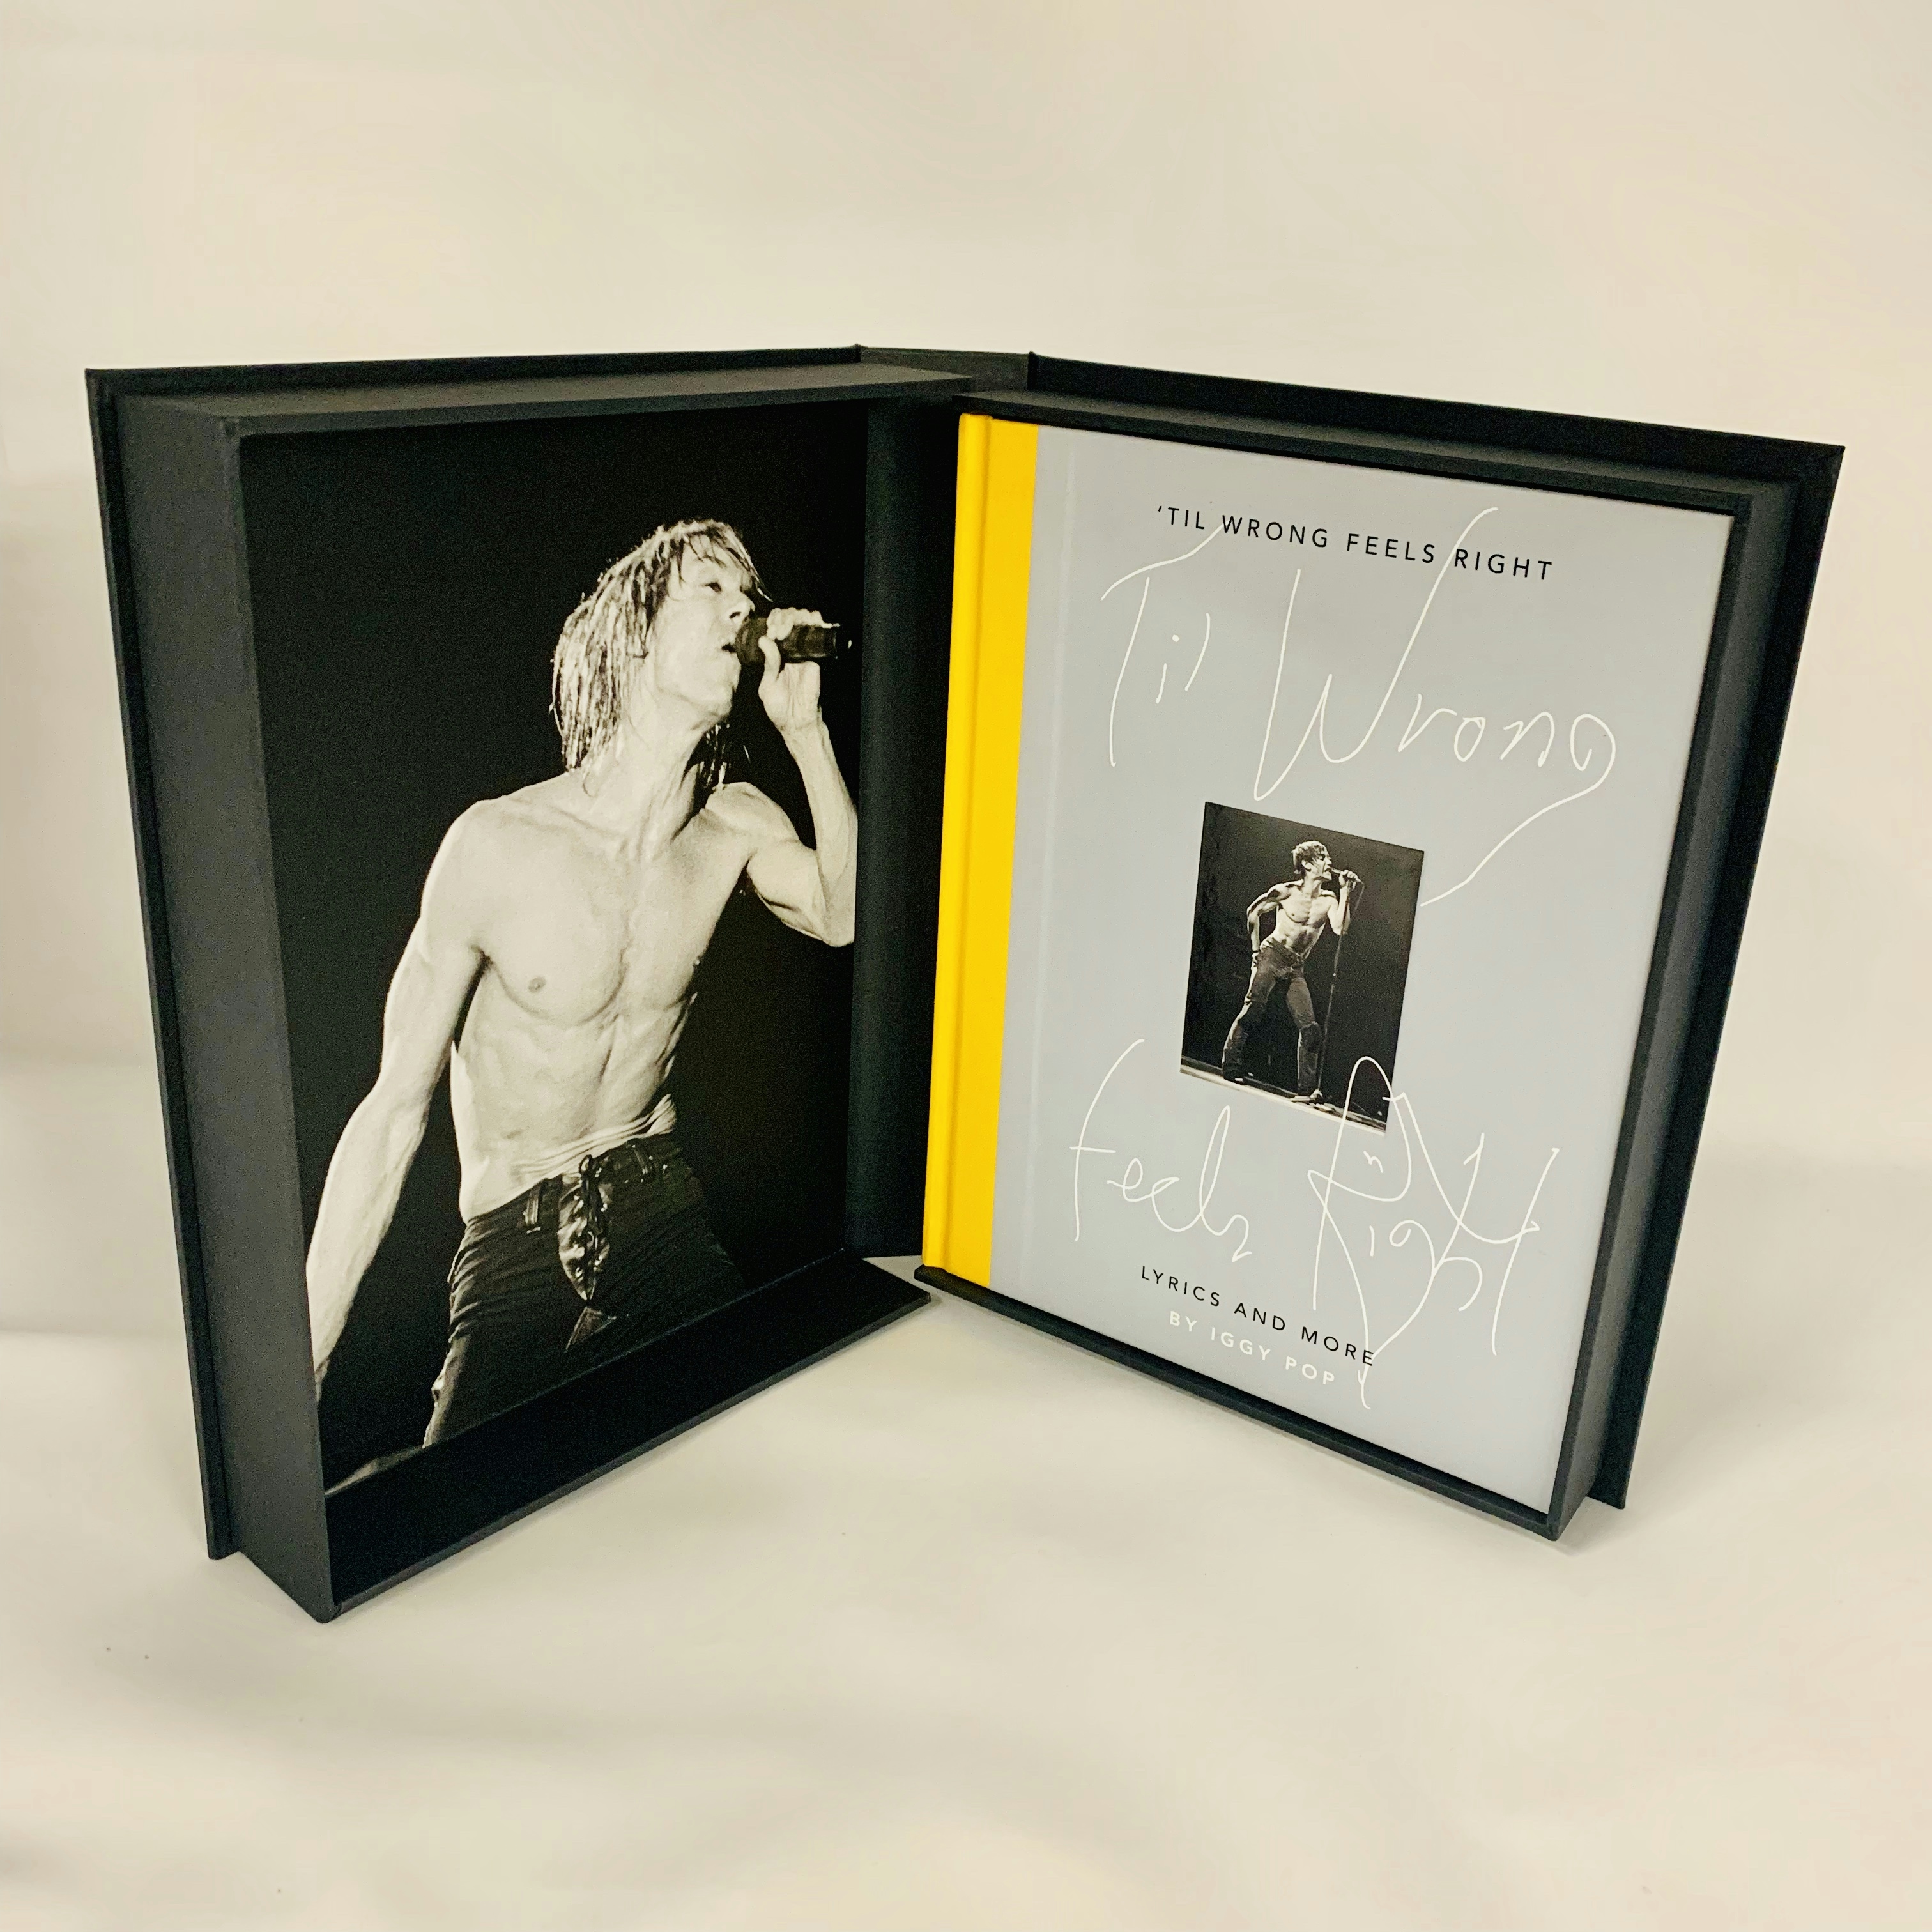 Album artwork for Album artwork for 'til Wrong Feels Right - Lyrics and More - DELUXE EDITION by Iggy Pop by 'til Wrong Feels Right - Lyrics and More - DELUXE EDITION - Iggy Pop